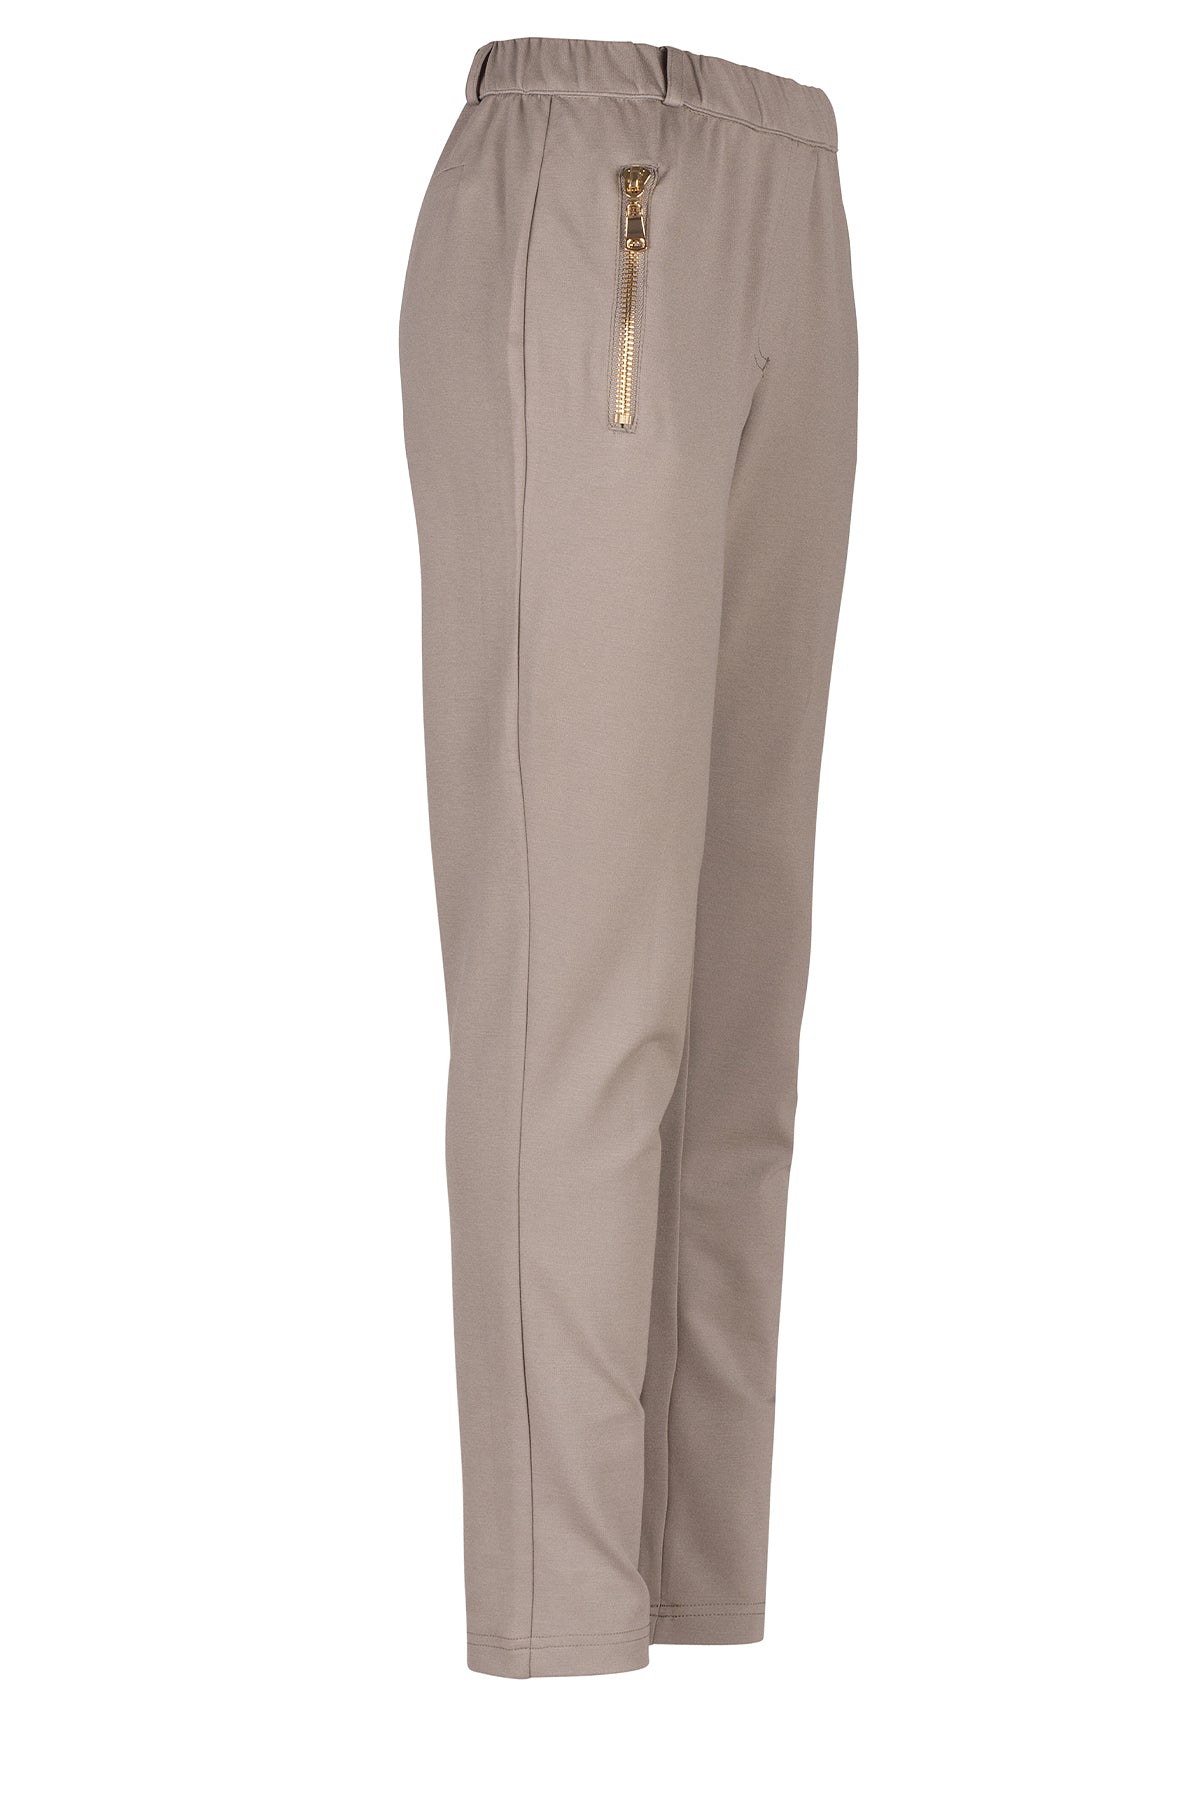 LUXZUZ // ONE TWO Rise Pant Pant 765 Drift Wood